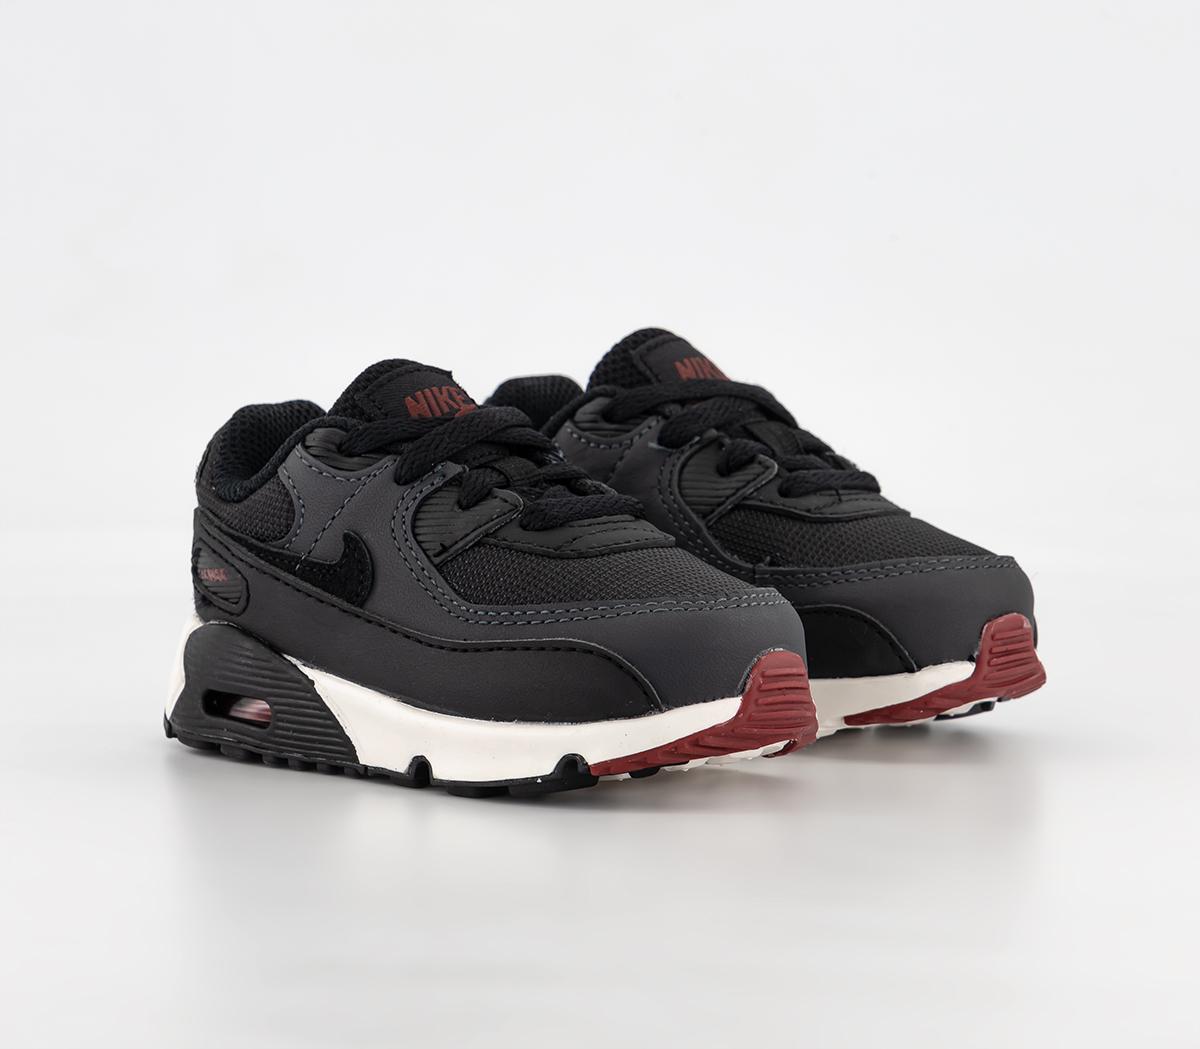 Nike Kids Air Max 90 Infant Trainers Anthracite Black Team Red Summit White, 4.5 Infant